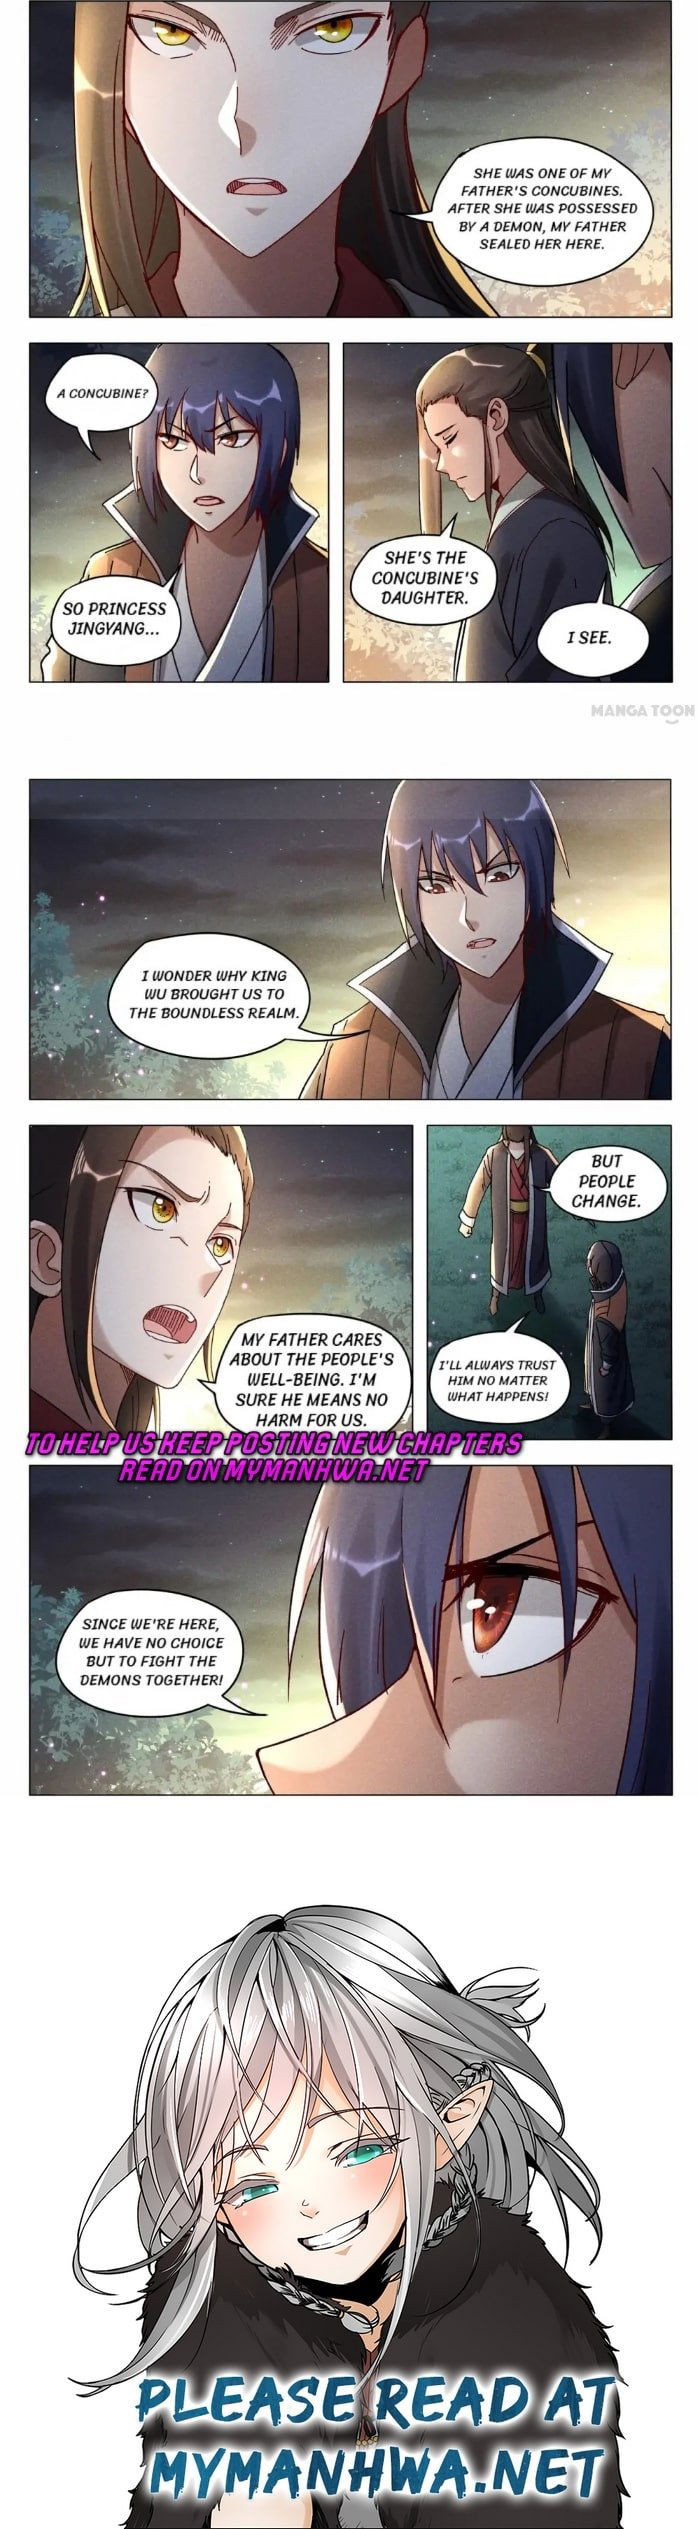 Master of Legendary Realms Chapter 434 page 4